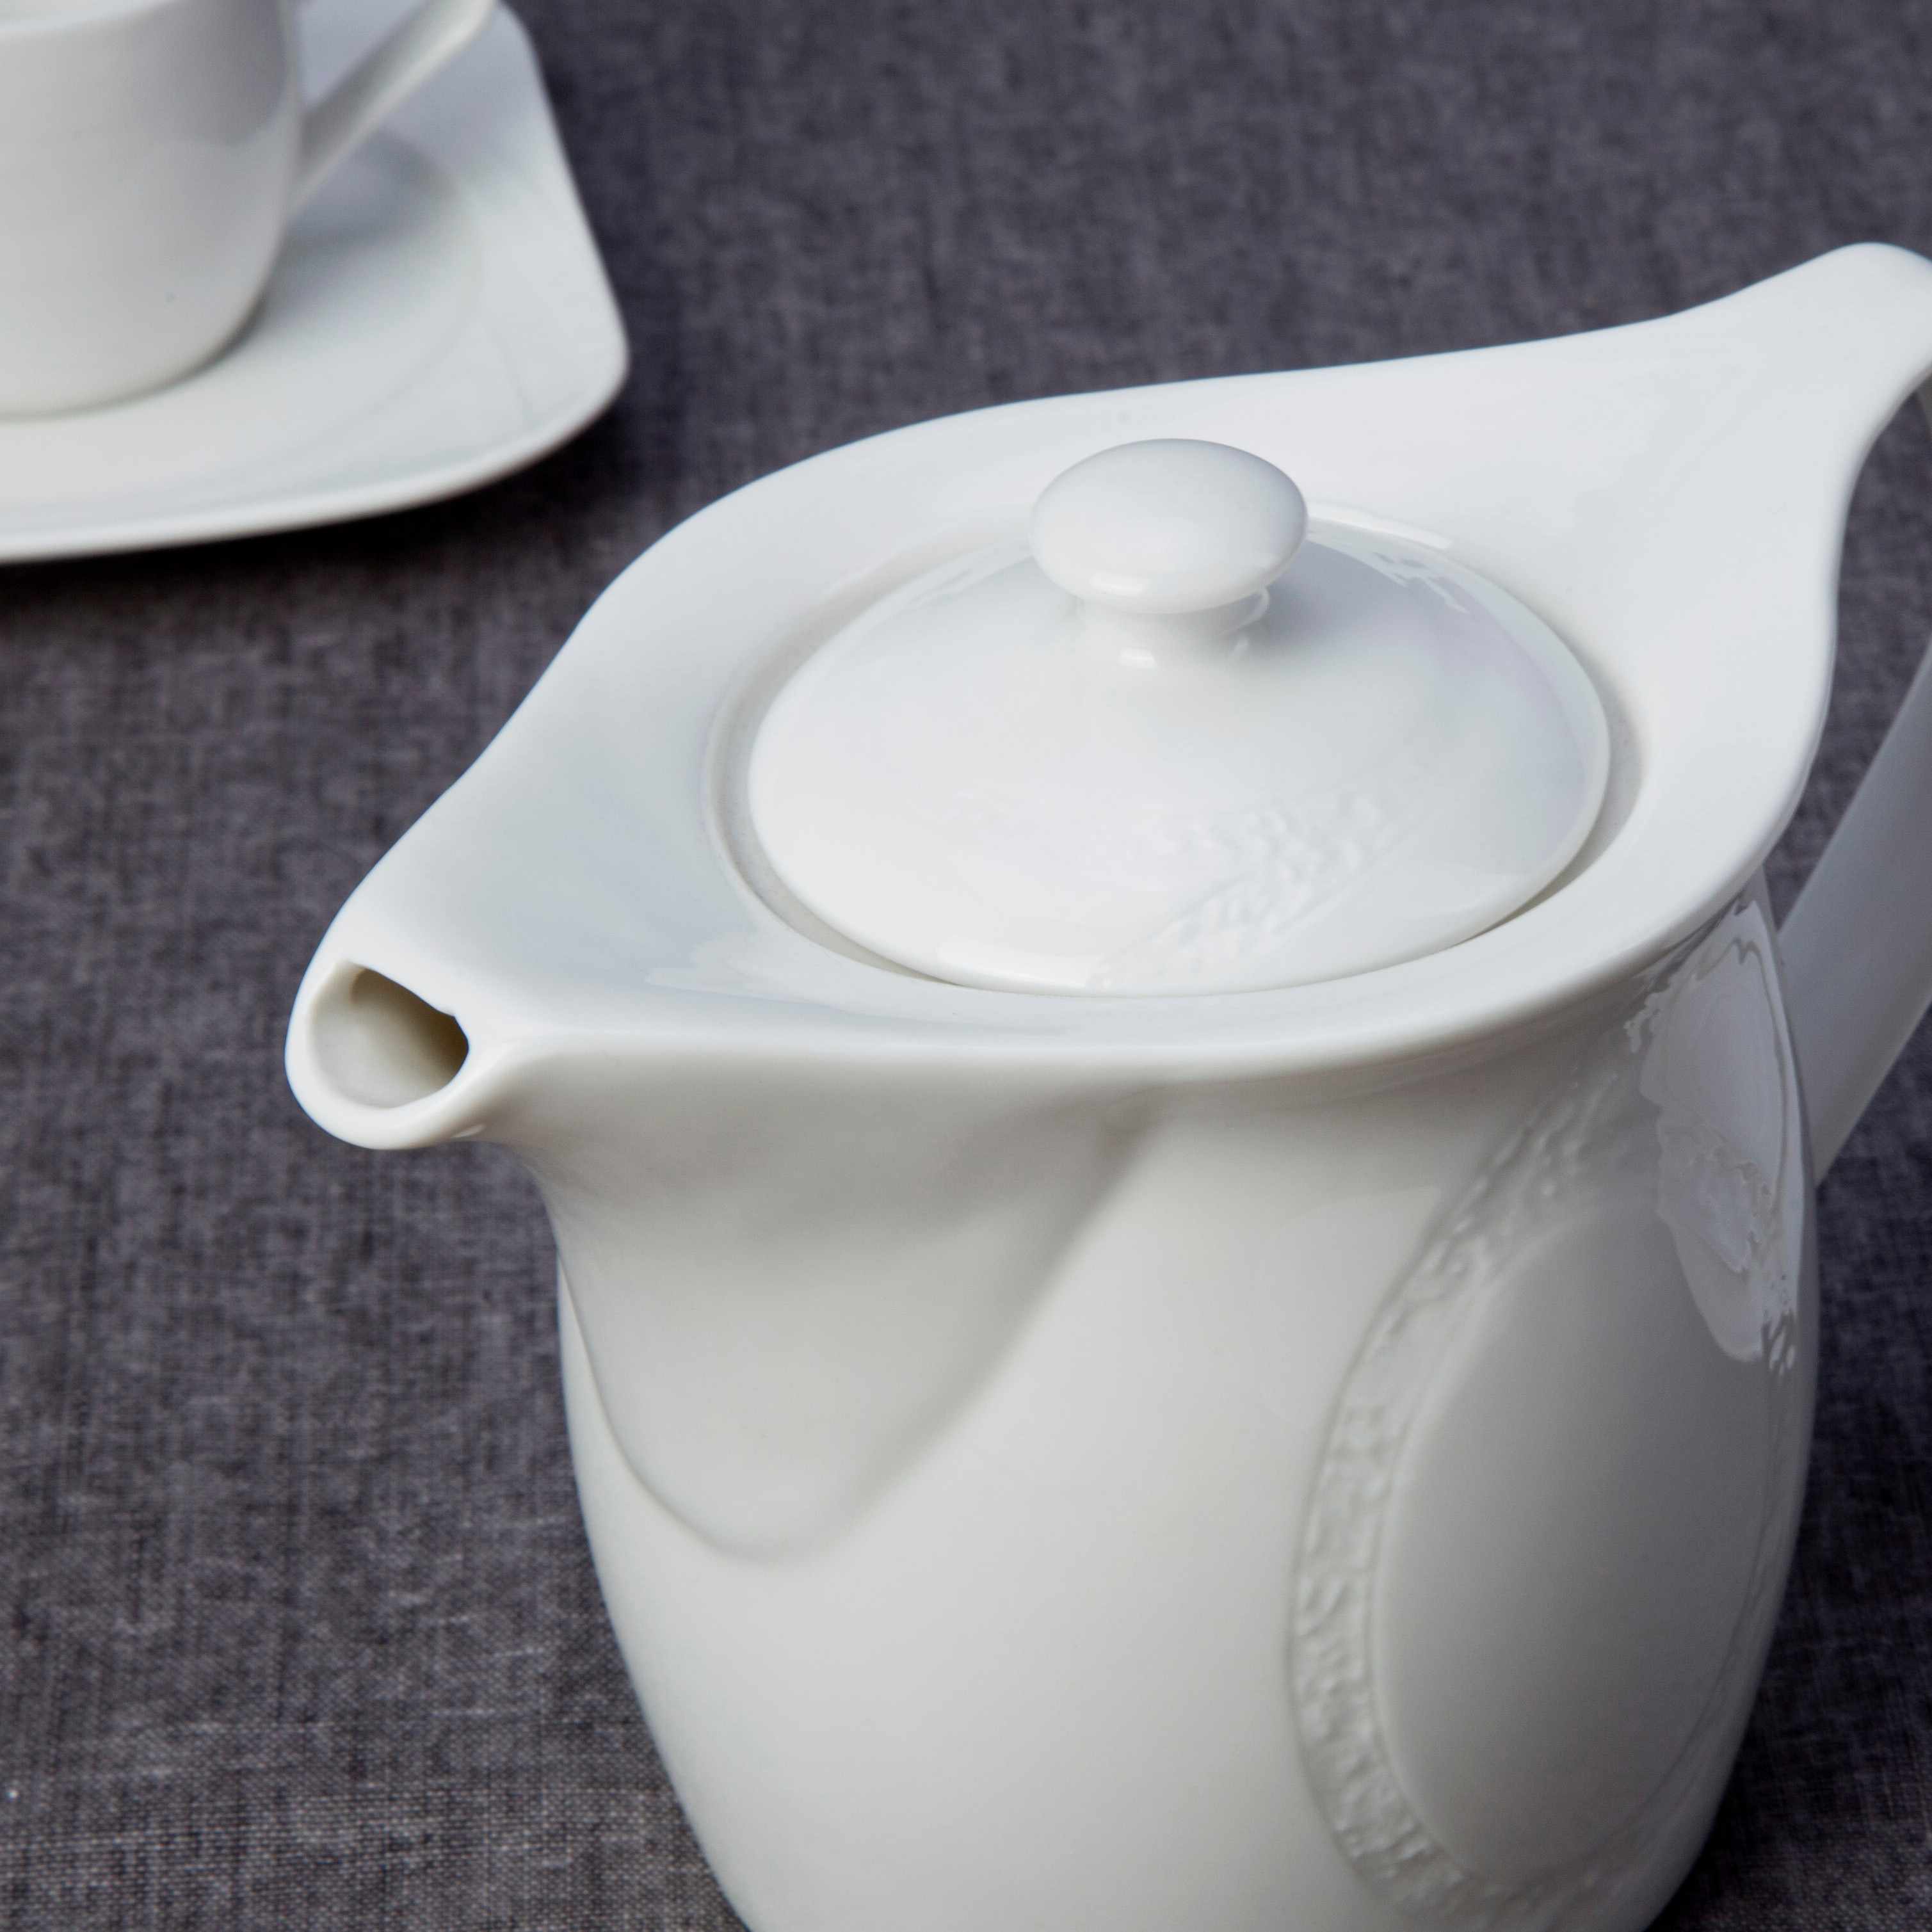 Two Eight-Find Restaurant Dining Ware White Porcelain Tableware From Two Eight Ceramics